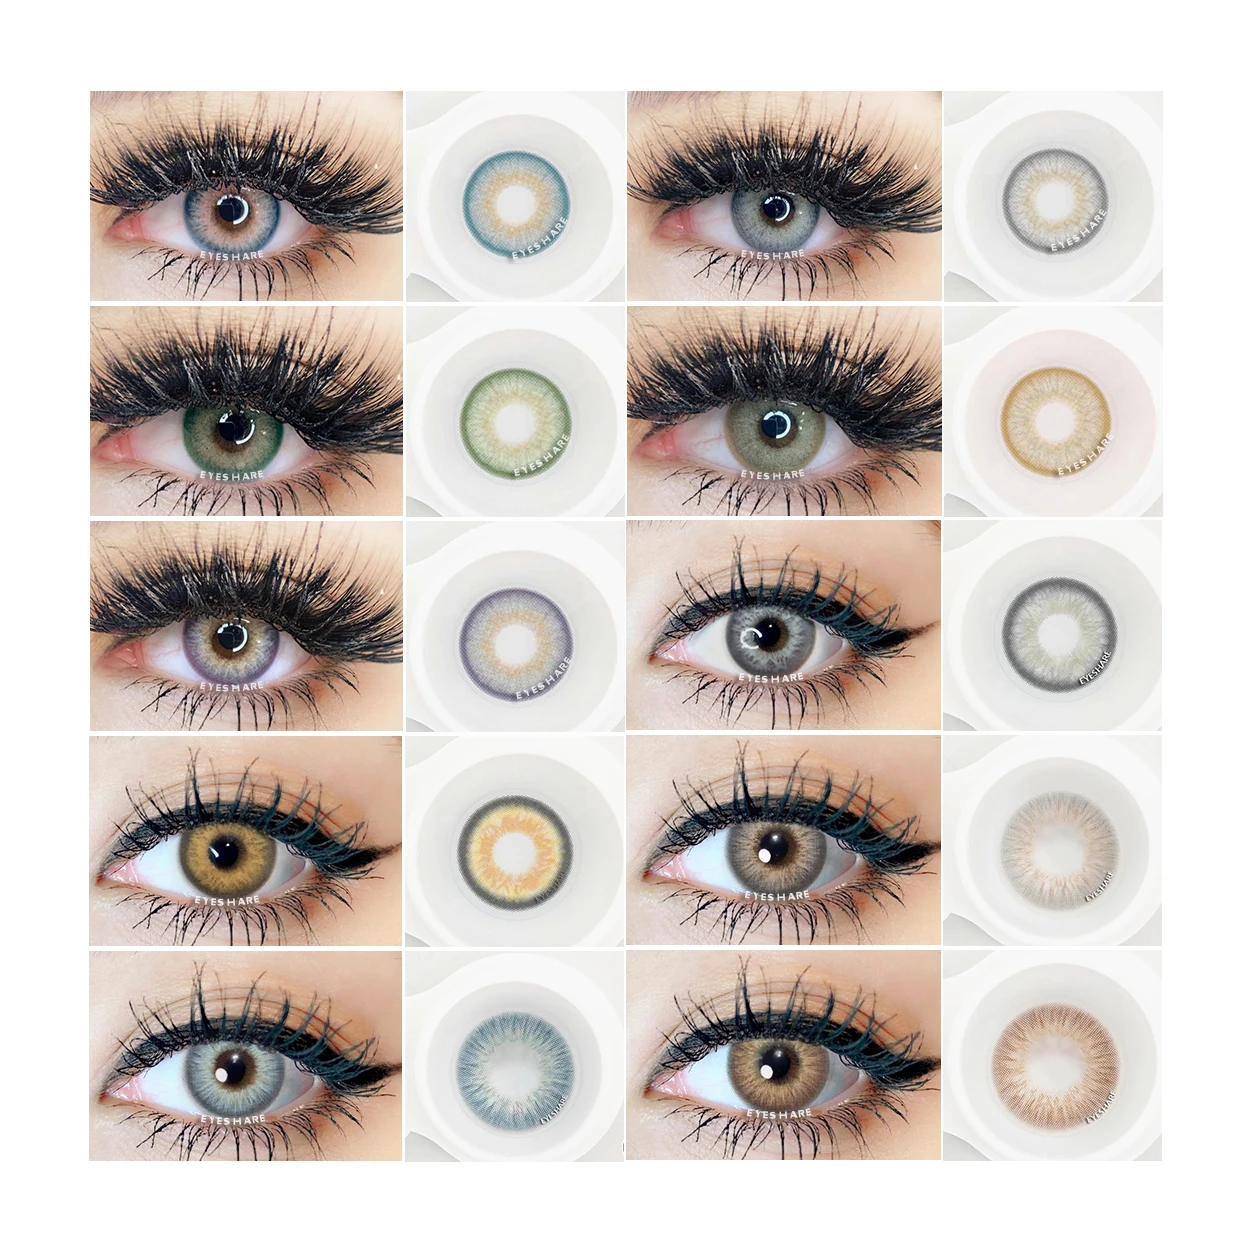 Sultry Sparkle: Expert Tips for Caring for Your Lenses and Crystal Display